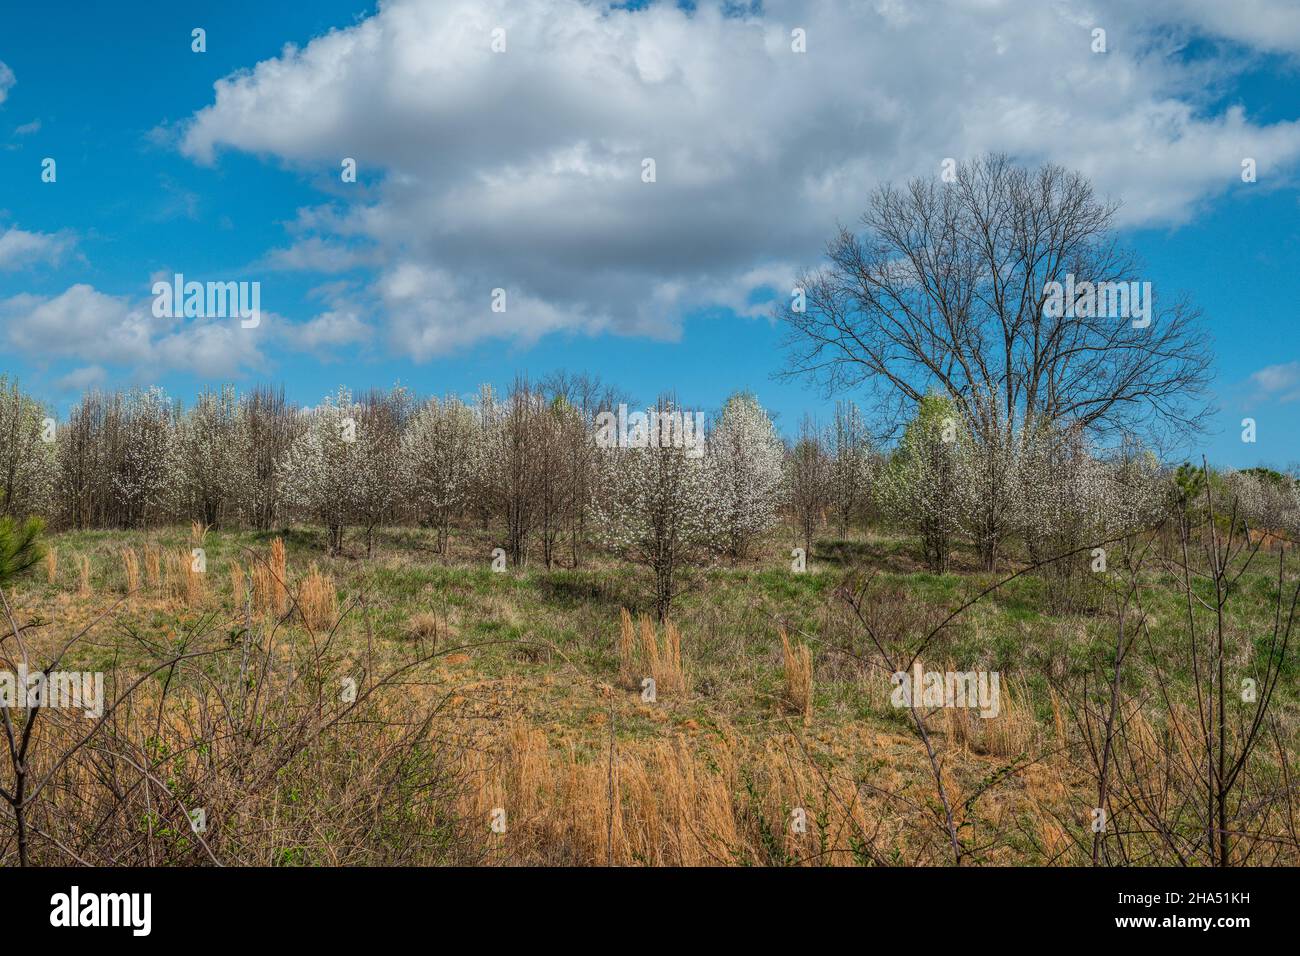 Open field with tall dried grasses in the foreground and white flowering trees blooming in the background on a sunny day with clouds in early spring Stock Photo